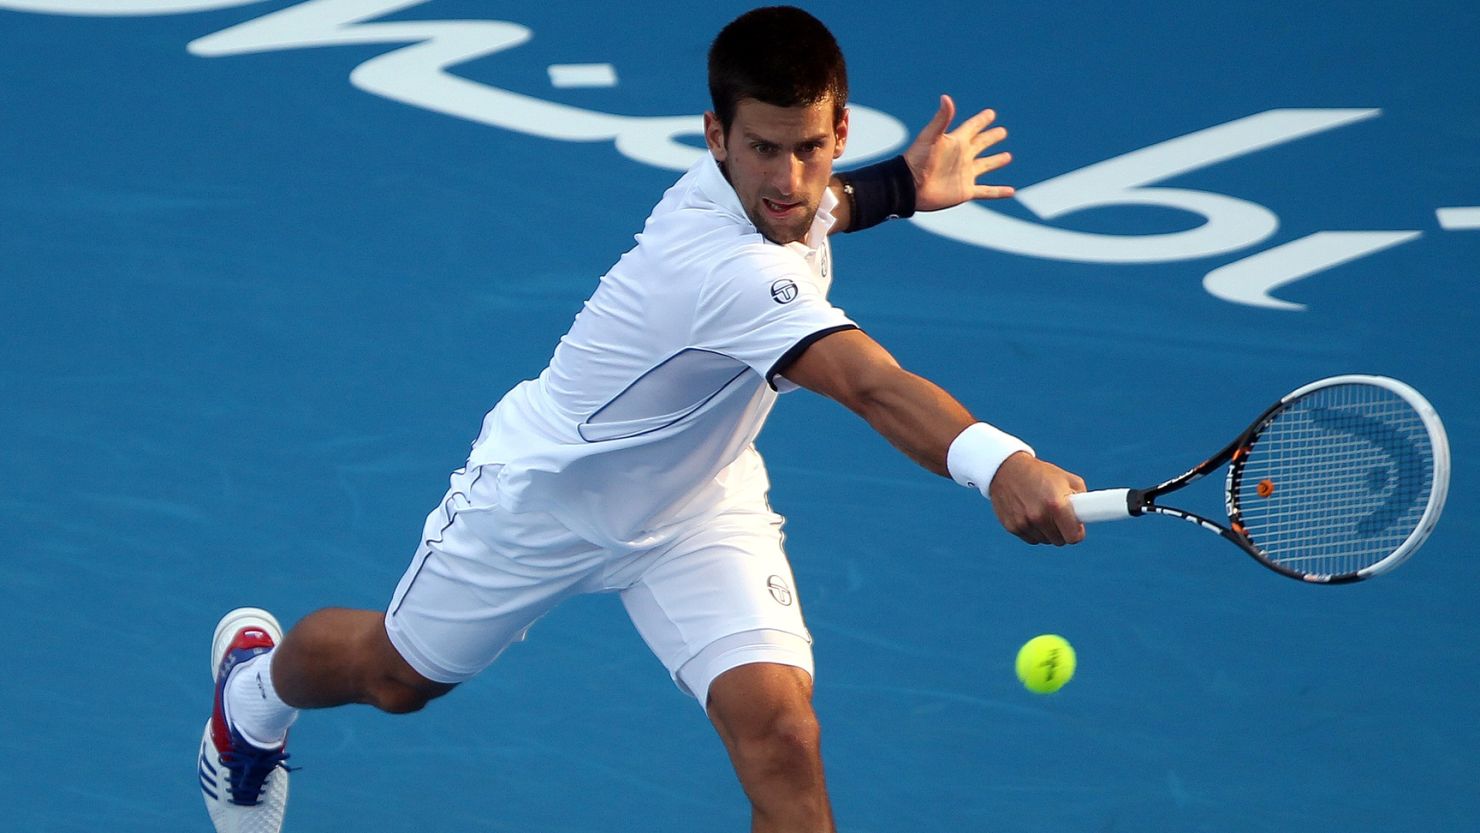 Novak Djokovic looks to be over the injuries that hampered him towards the end of last season.